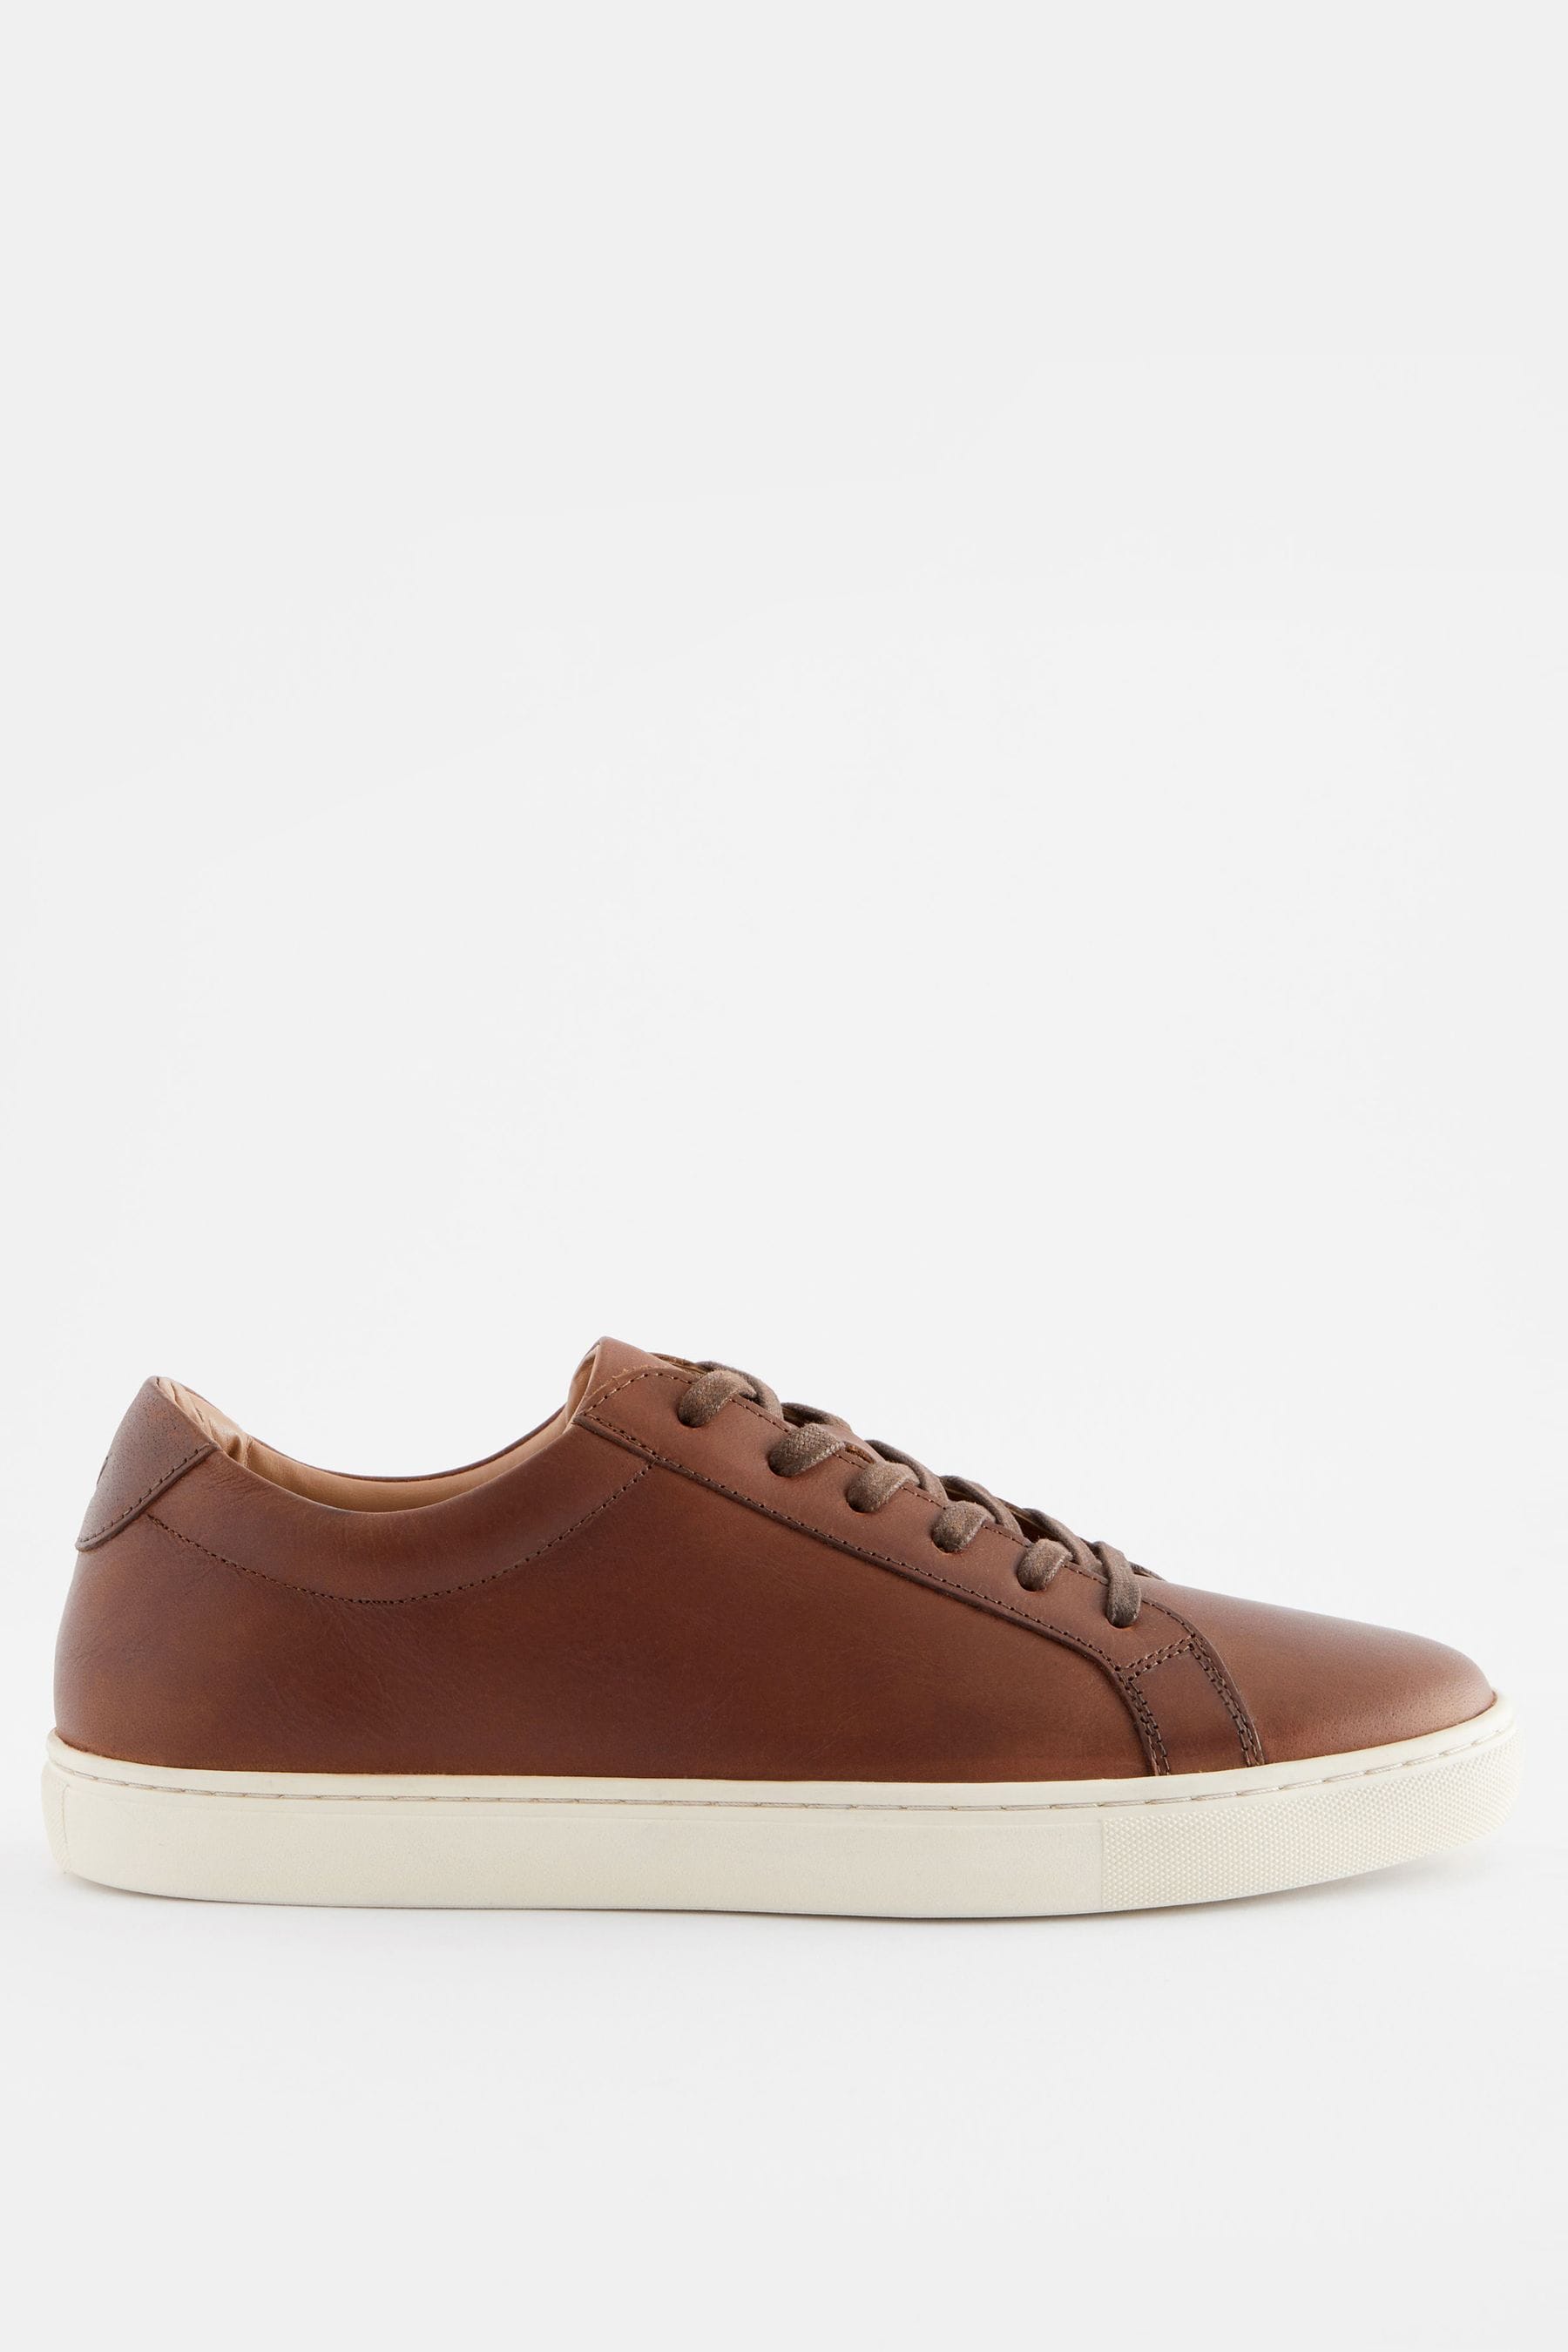 Buy Tan Brown Leather Trainers from the Next UK online shop